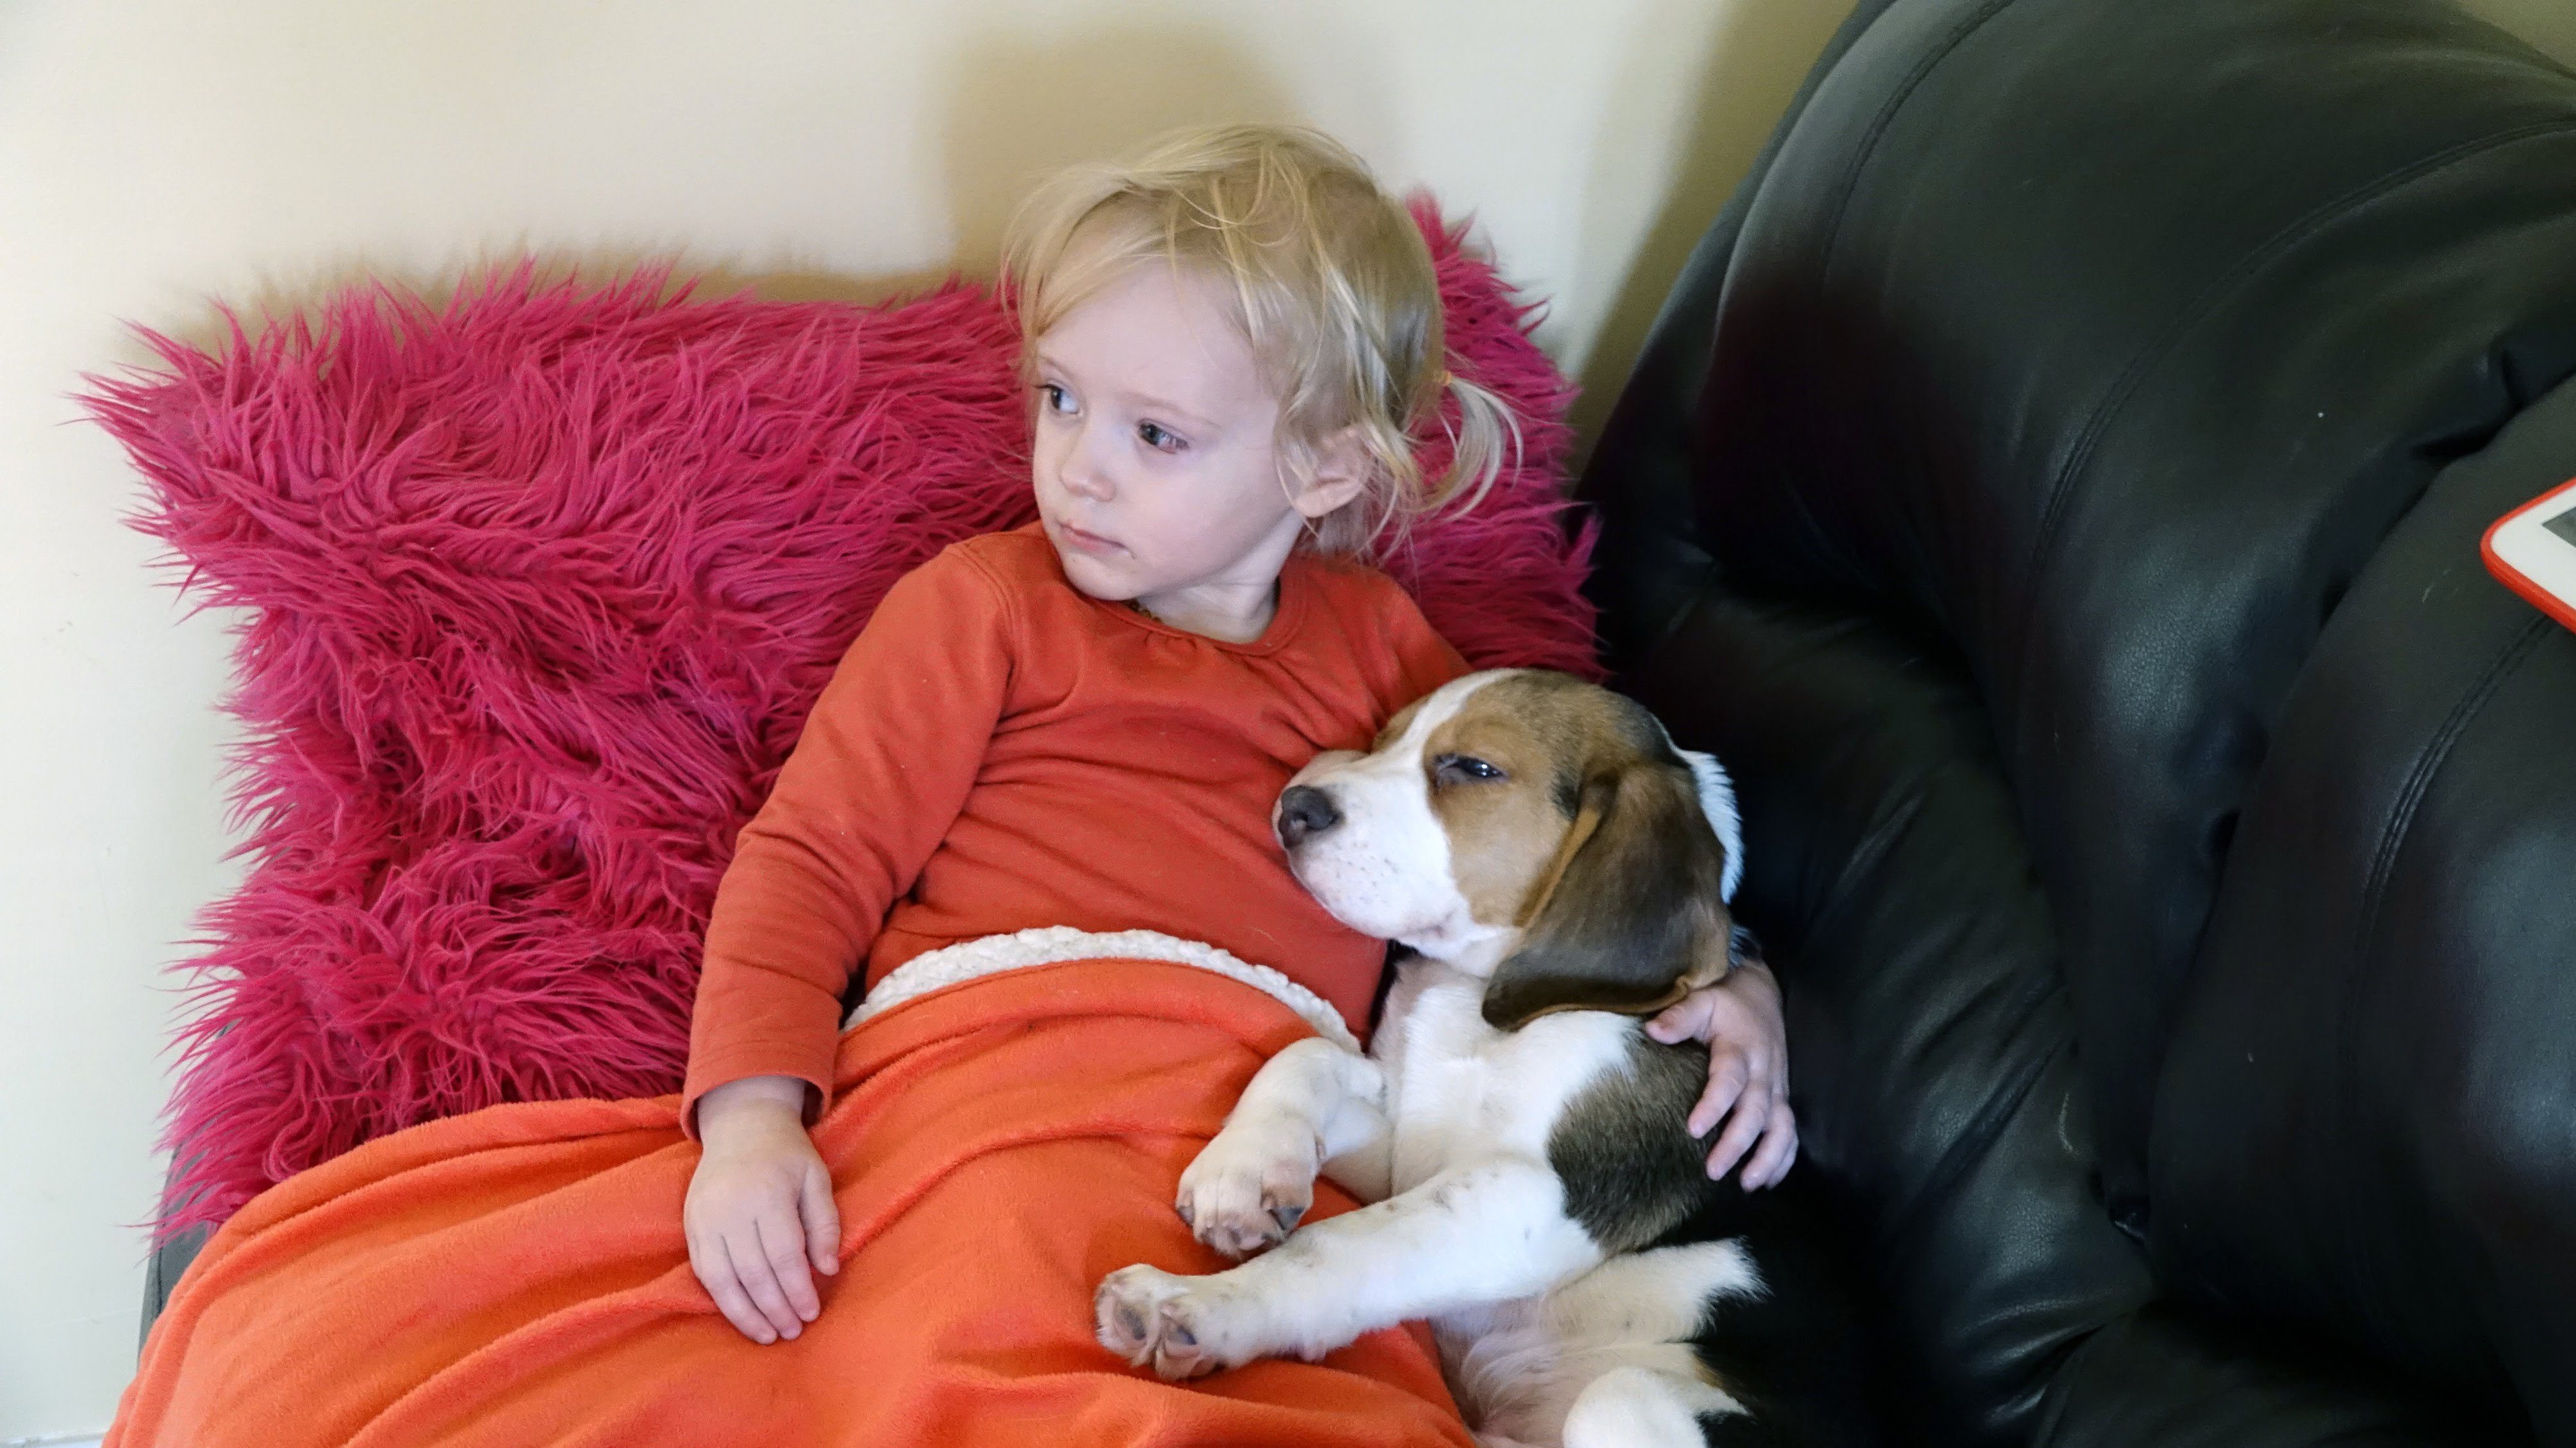 Cute Dogs Comfort a Sick Child While Watching a Movie